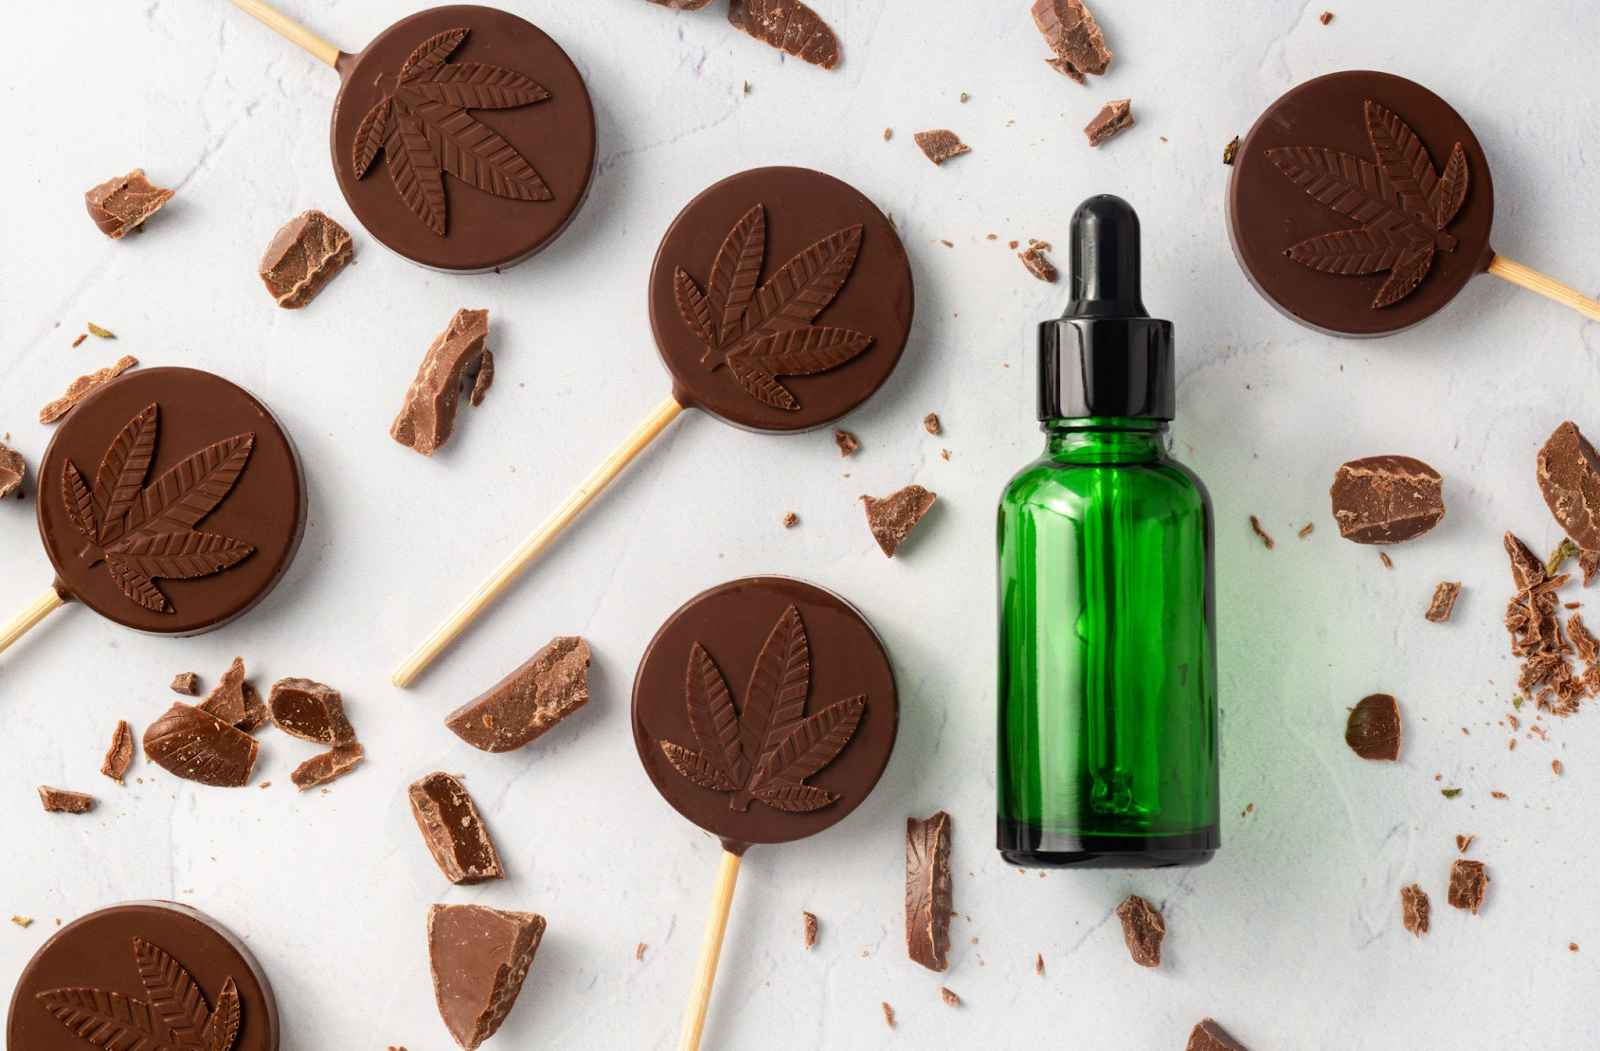 Edible cannabis products